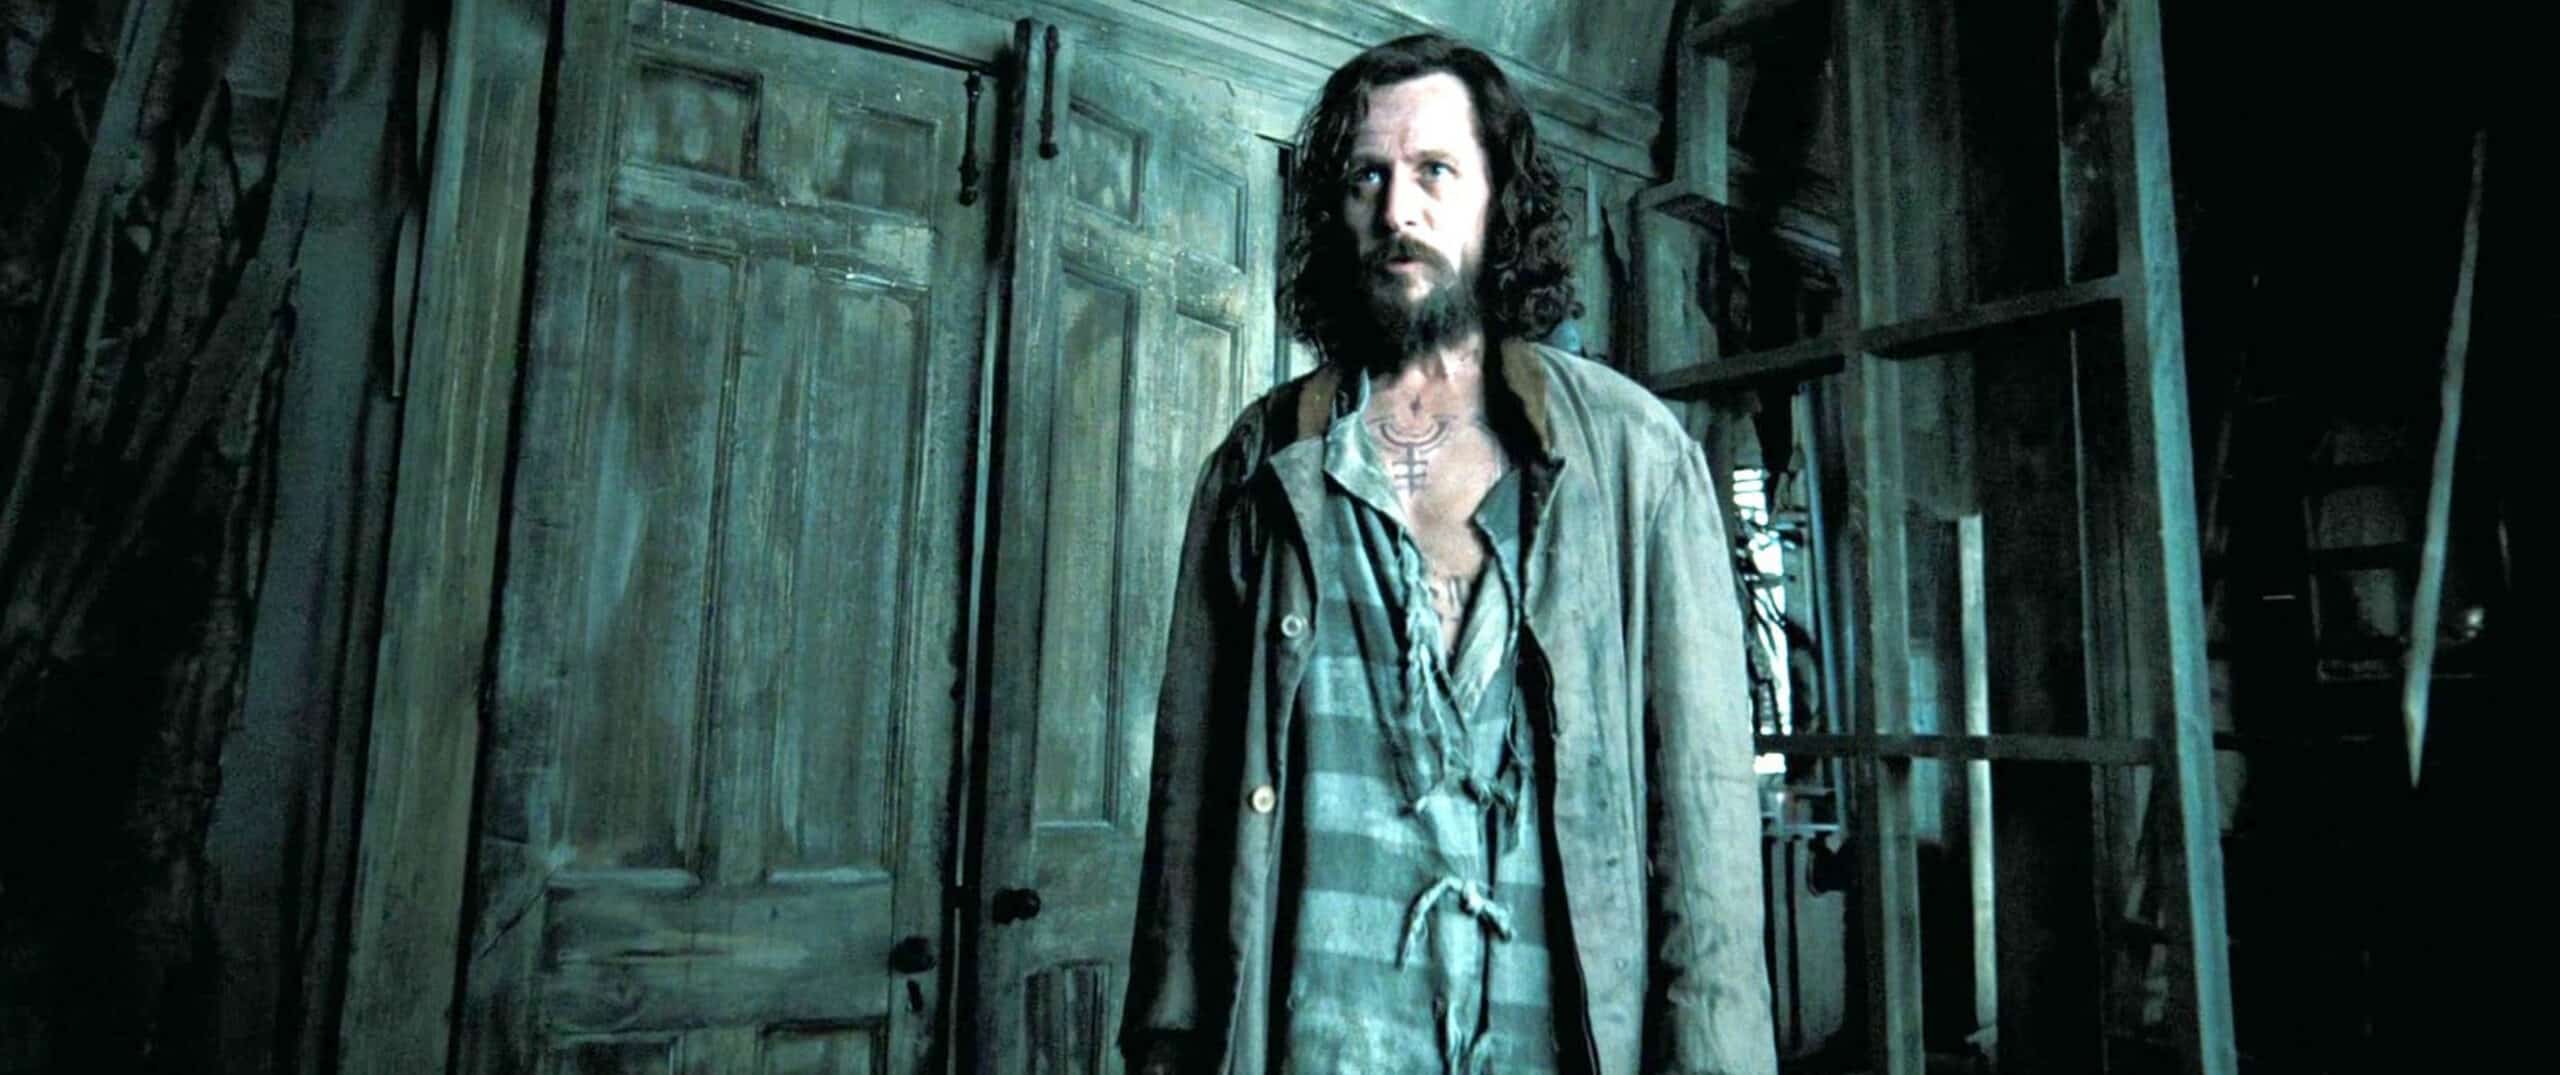 <ul> <li><strong>Who said it:</strong> Sirius Black</li> <li><strong>Played by:</strong> Gary Oldman</li> <li><strong>Movie:</strong> Harry Potter and the Prisoner of Azkaban (2004)</li> </ul> <p>Harry's life was completely transformed by the loss of his parents. However, this line from Sirius Black is a comfort to Harry. After stating "It's cruel that I got to spend so much time with James and Lily, and you so little," Sirius Black reminds Harry that his parents and all those we love never really leave us.</p>